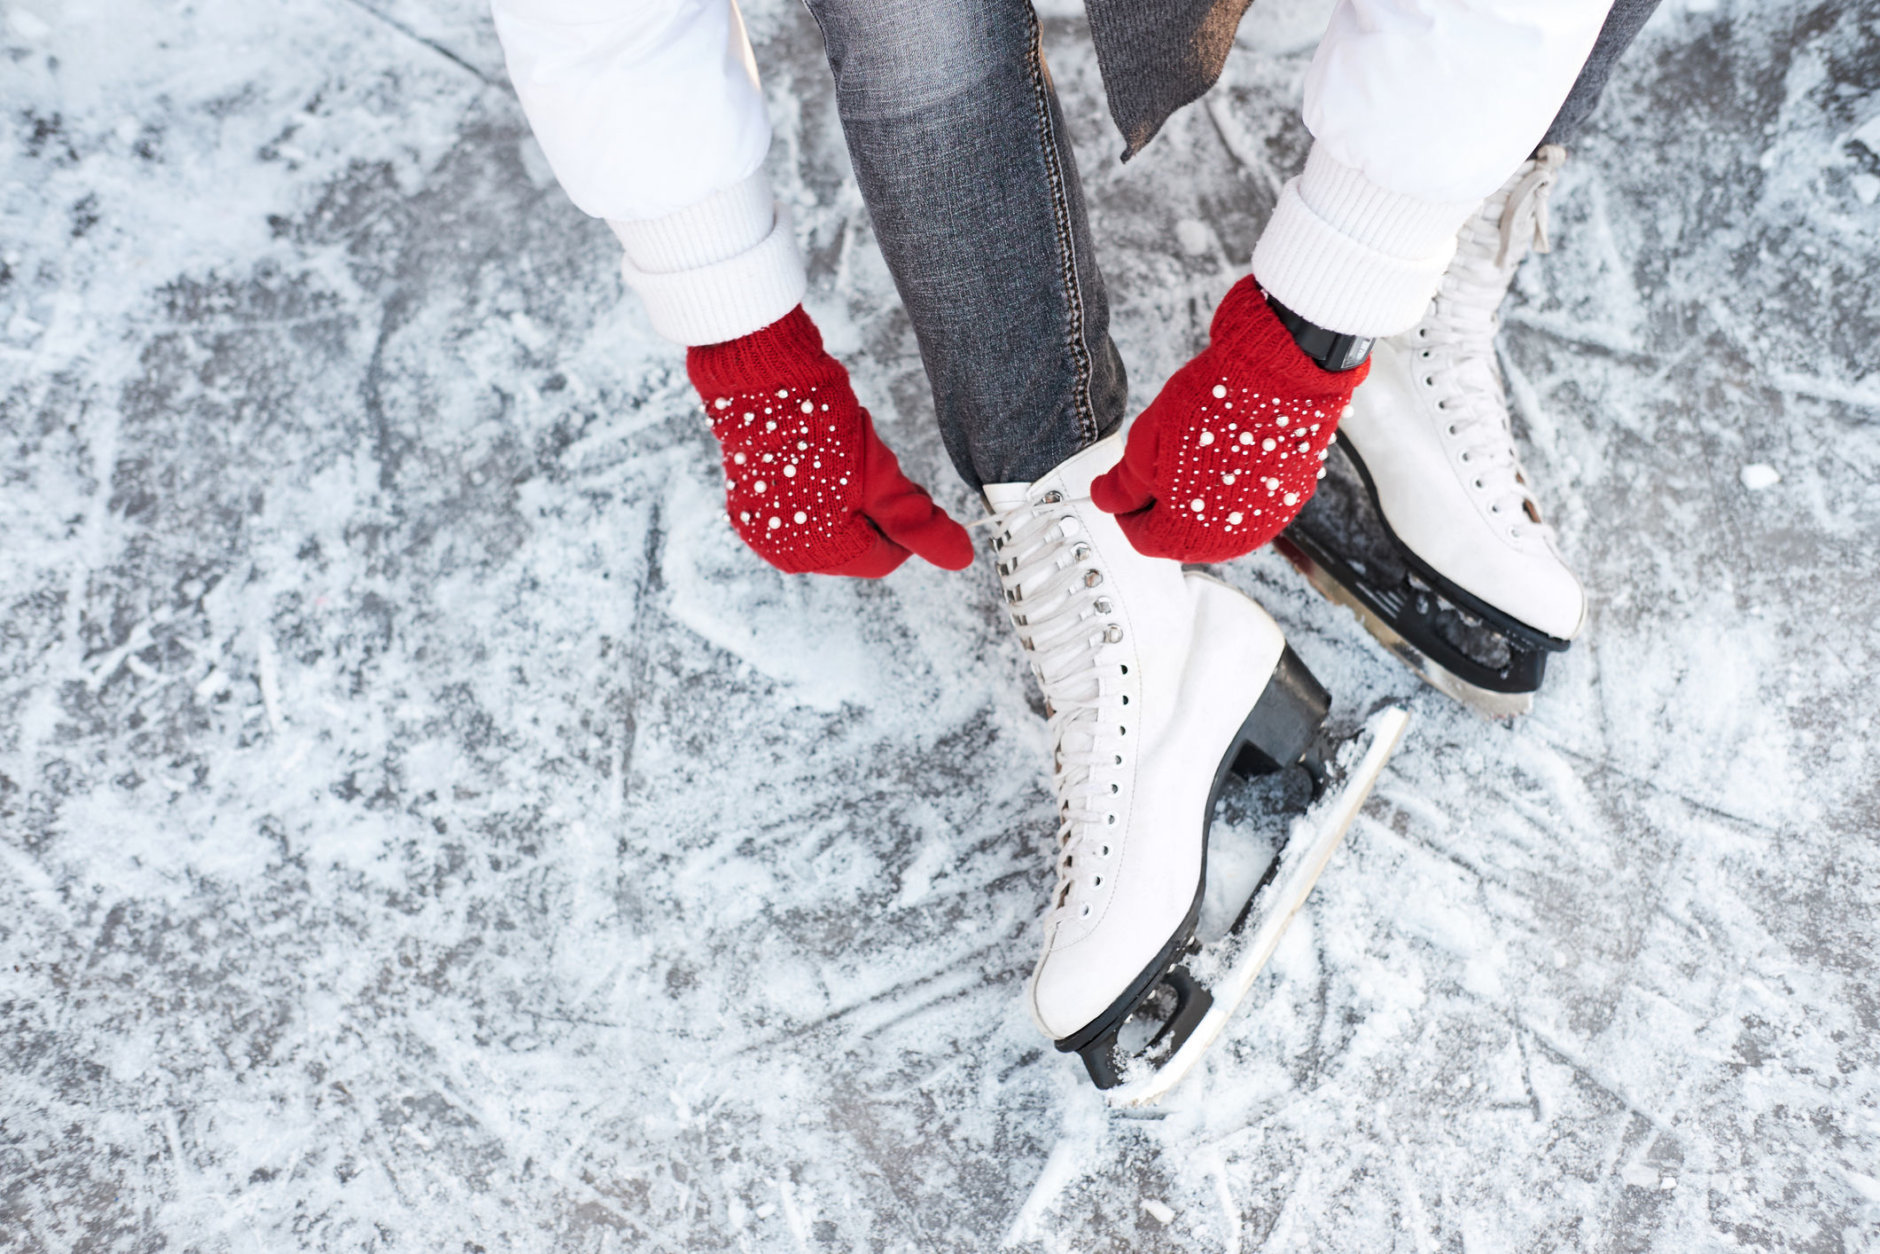 <h2>Lace up your skates</h2>
<p>Looking to recreate your favorite Olympic ice skating moves? Or, maybe just learning how to stand without falling on your face? Ice rinks are easy to find around the D.C. area. In D.C., there&#8217;s Fort Dupont Ice Arena; in Maryland, there&#8217;s an outdoor one in Rockville; and in Virginia, you can skate like a Caps player at the MedStar Capitals Iceplex.</p>
<p>See WTOP&#8217;s &#8220;<a href="https://wtop.com/lifestyle/2019/11/best-places-to-ice-skate-in-the-dc-area/" target="_blank" rel="noopener">Best places to skate in the DC area</a>.&#8221;</p>
